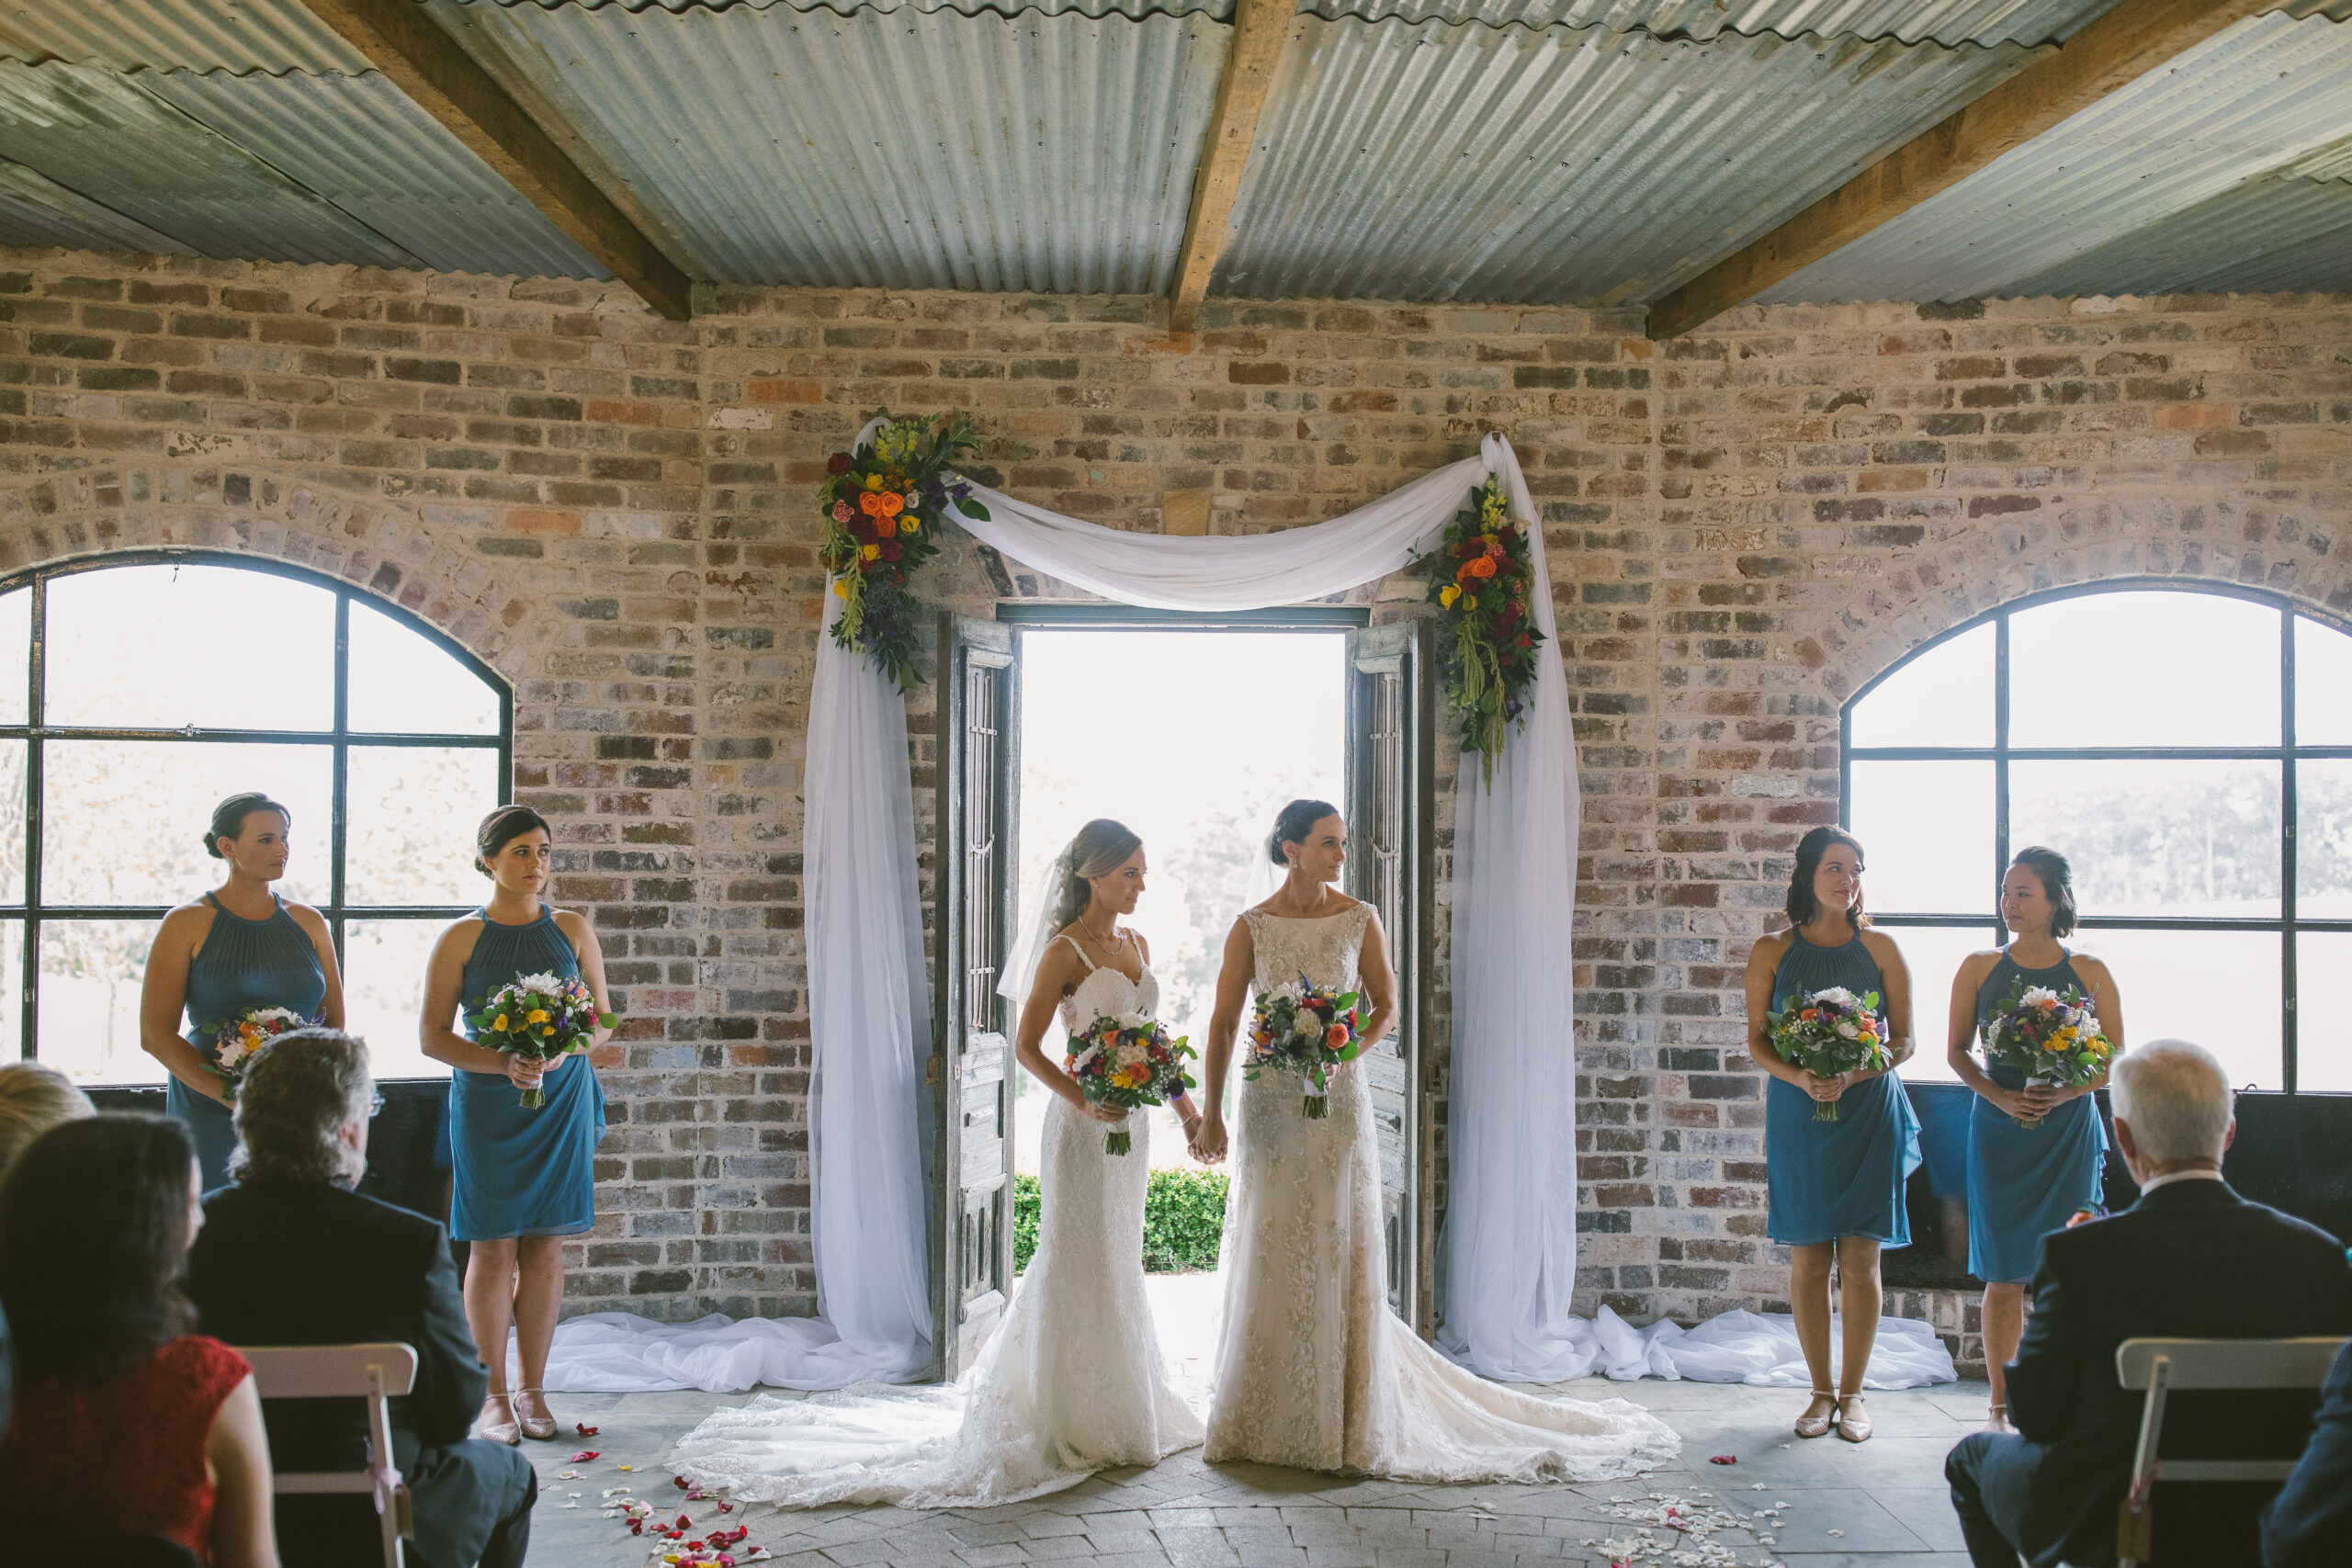 Brides and bridesmaids standing by the doorway in a rustic brick wedding venue, with bright floral arrangements